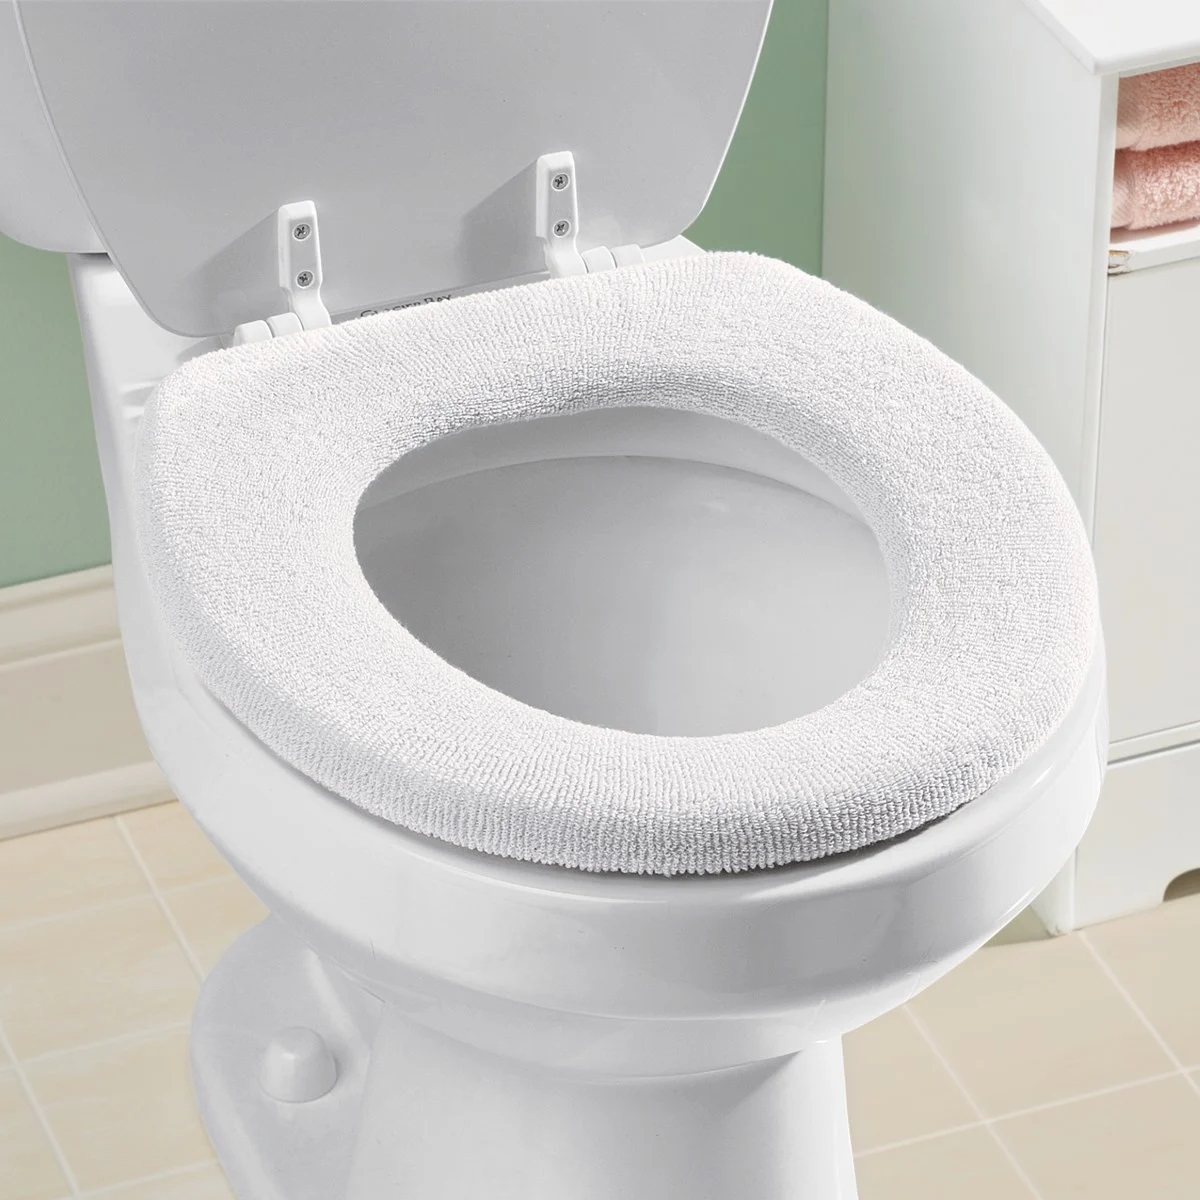 How To Put Toilet Seat Cover